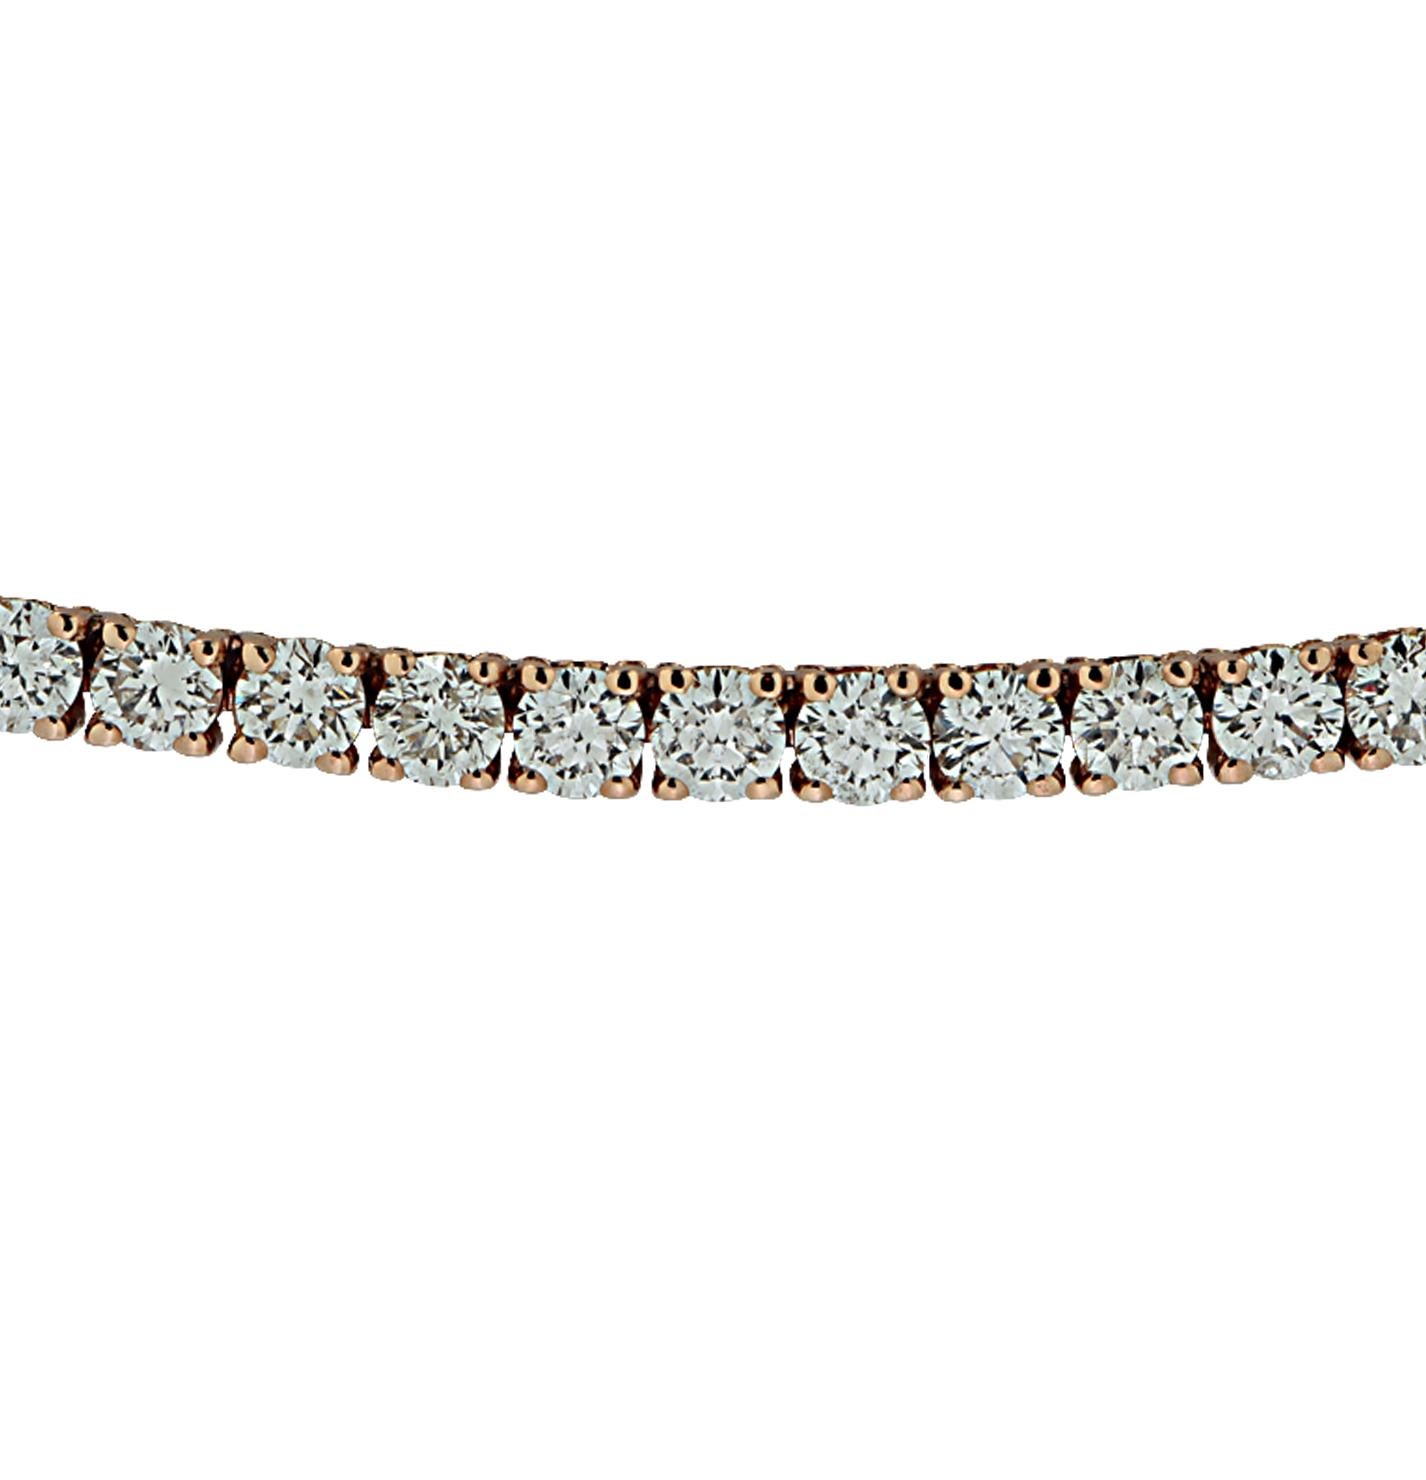 Exquisite Vivid Diamonds straight line diamond necklace crafted in Rose Gold, showcasing 179 round brilliant cut diamonds weighing 5.96 carats, F-G color, VS-SI Clarity. Each diamond was carefully selected, perfectly matched and set in a seamless